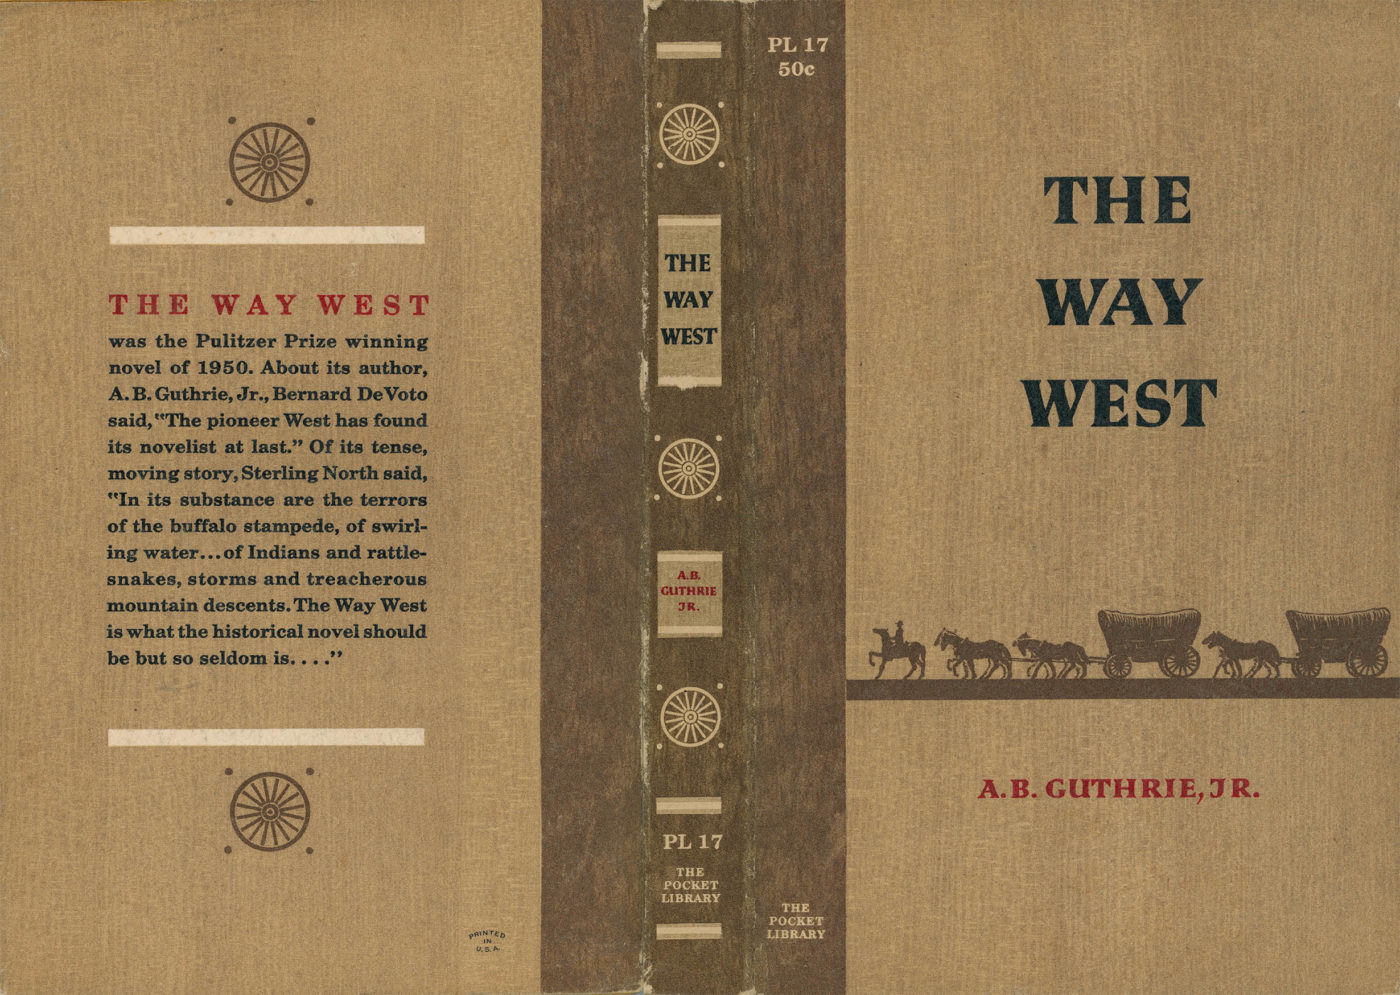 The West Way cover